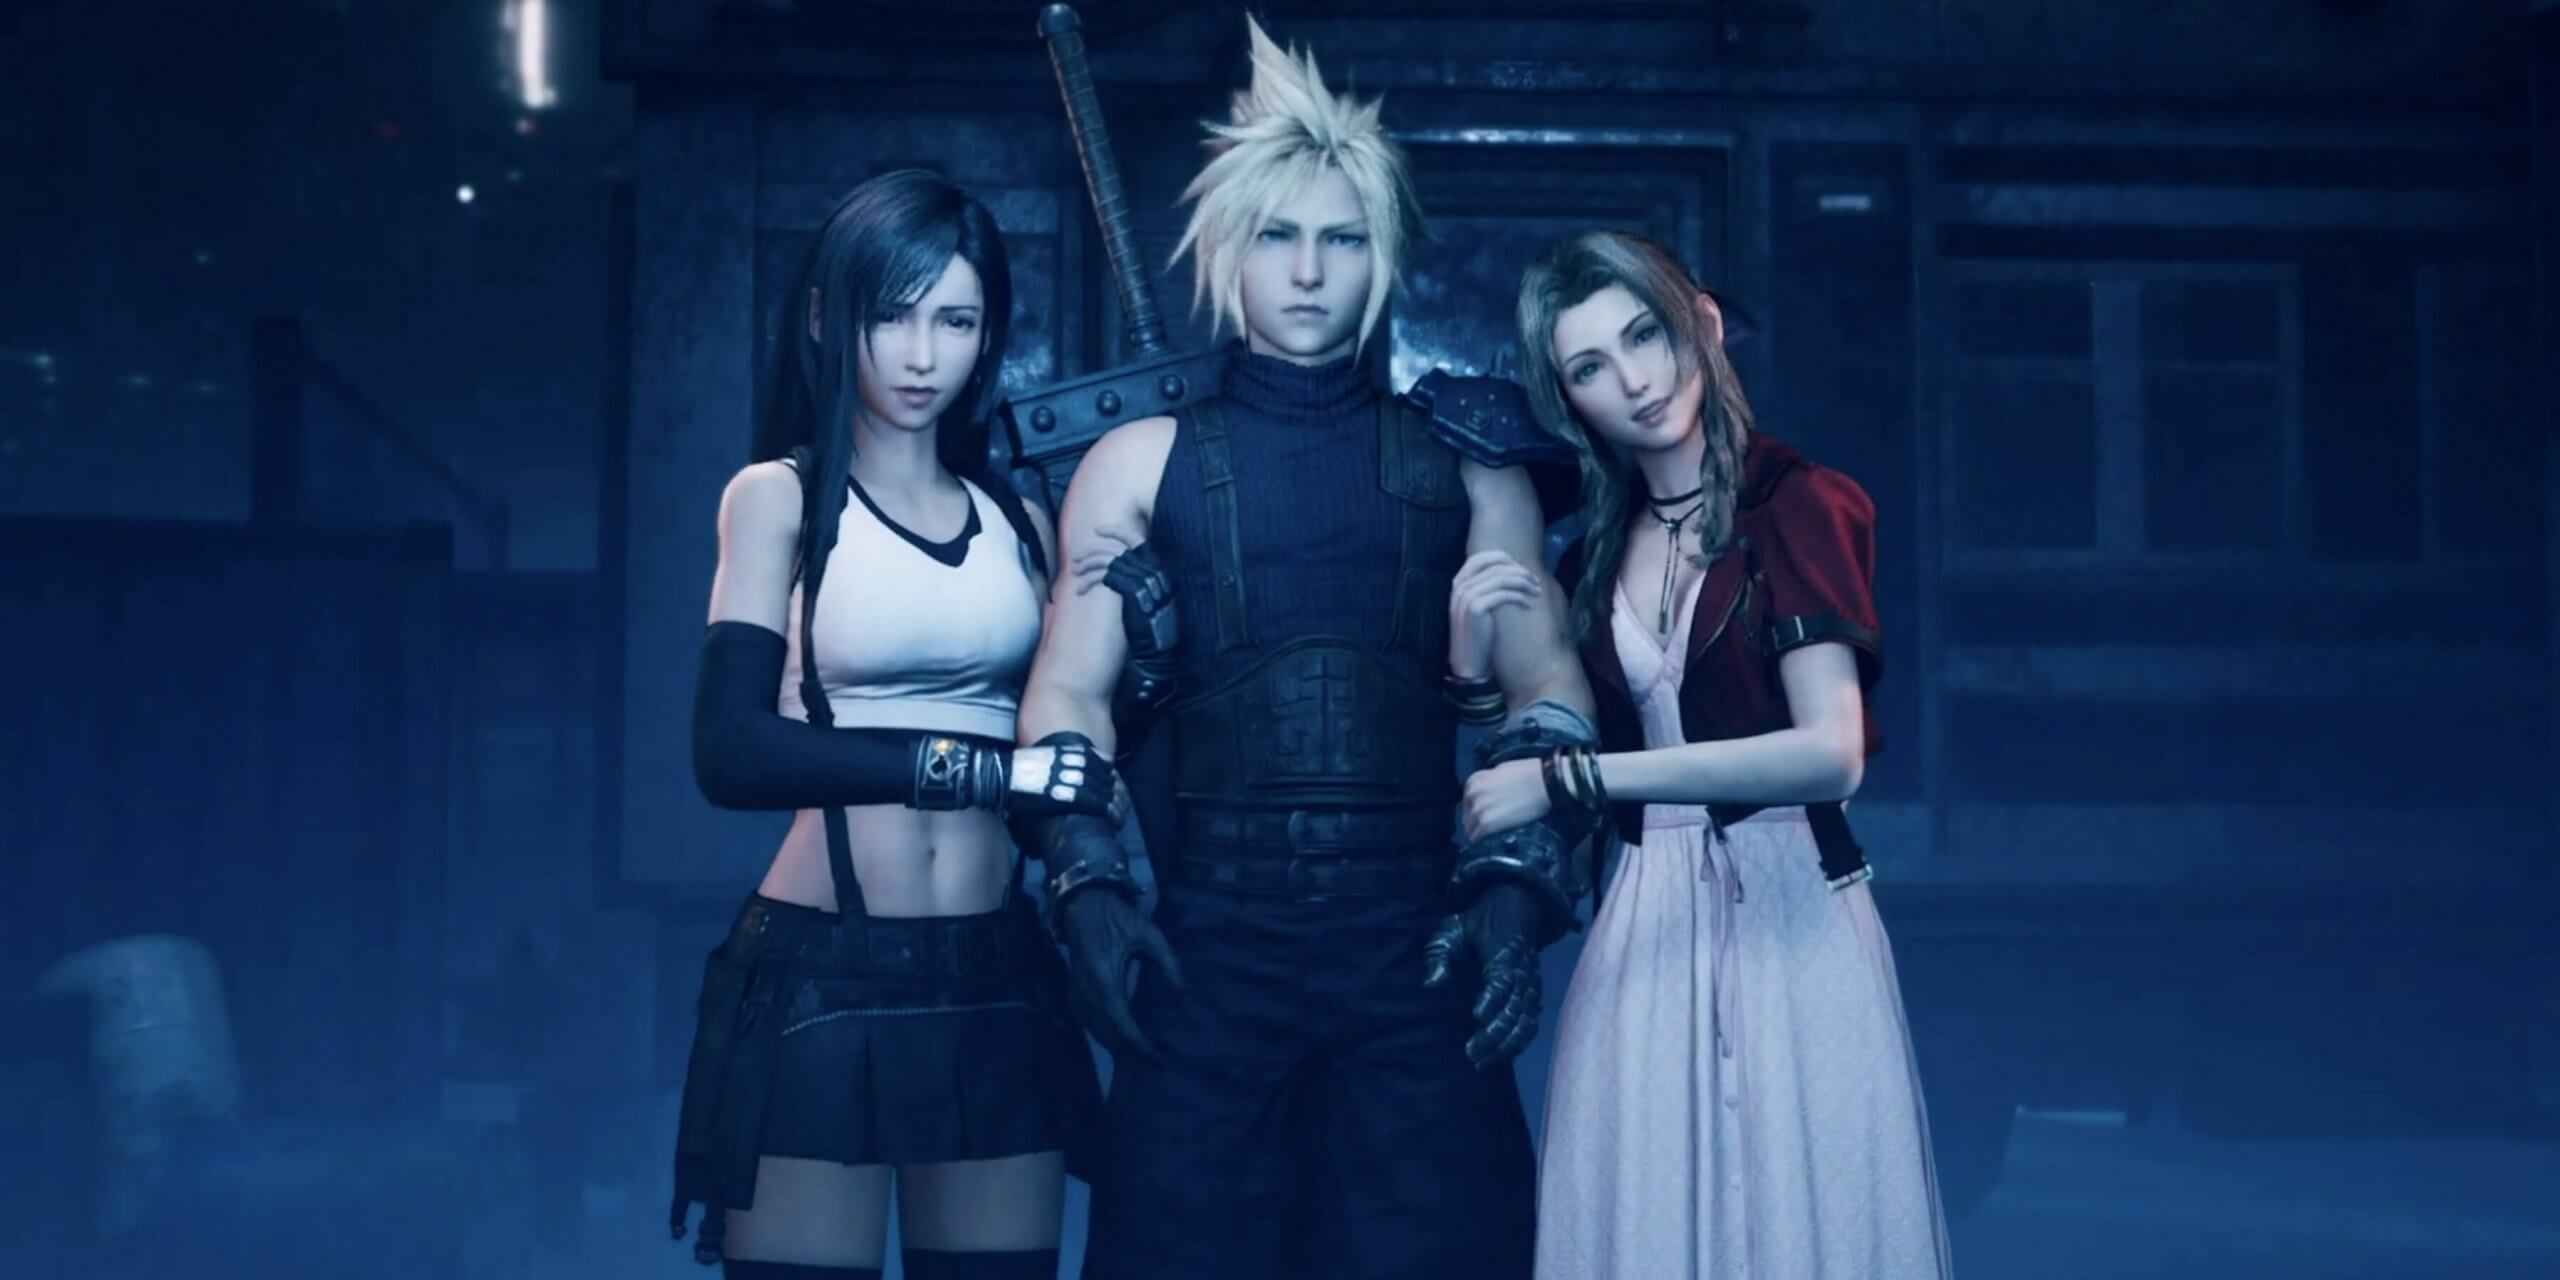 Cloud, Tifa and Aerith in the FF7 Remake 